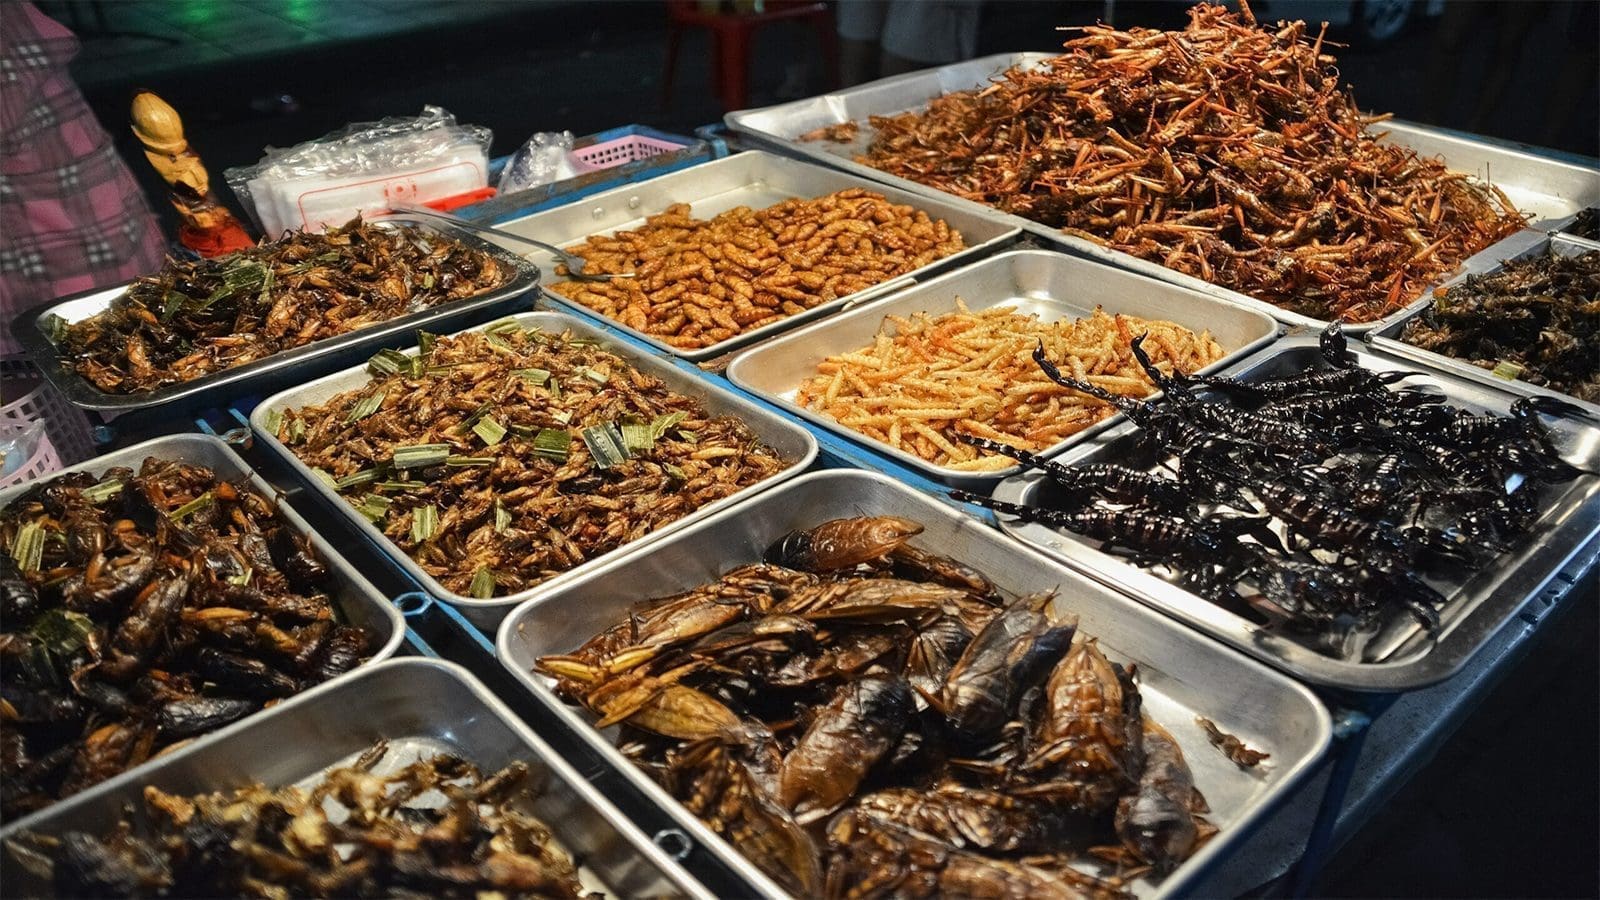 Food Standards Agency finds minimal safety risk for edible insects in UK market